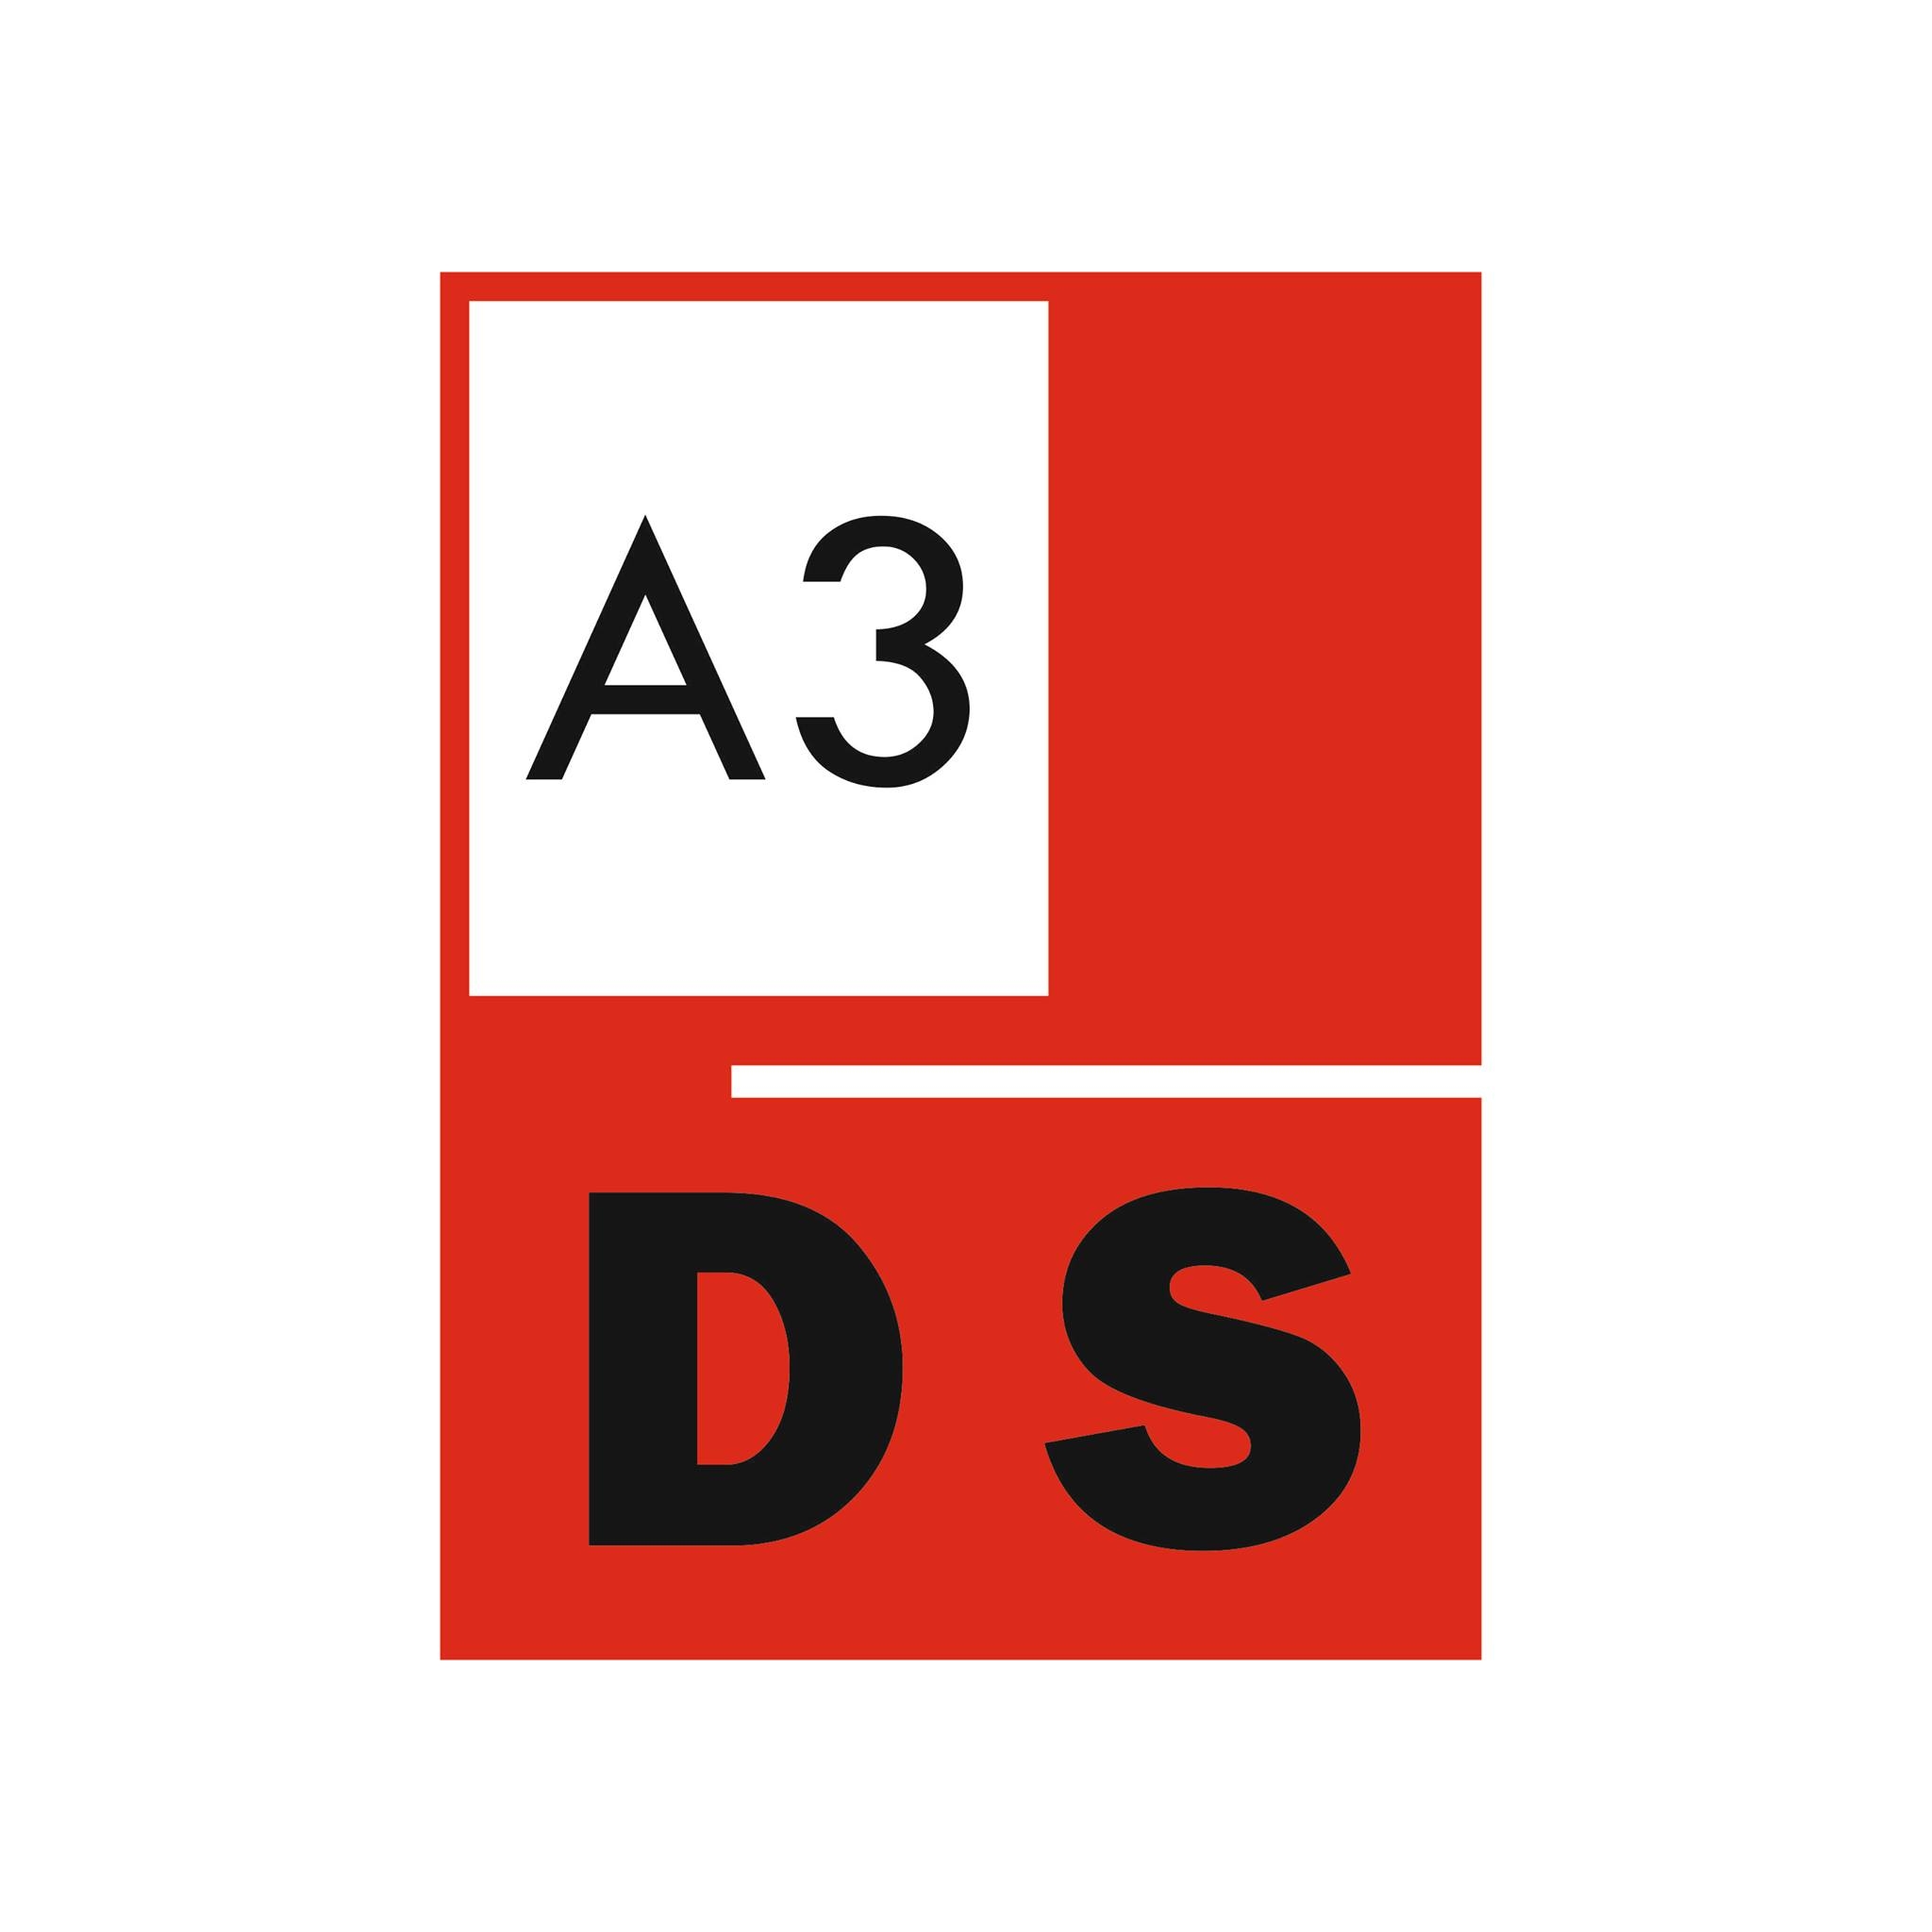 a3 design studio|Accounting Services|Professional Services